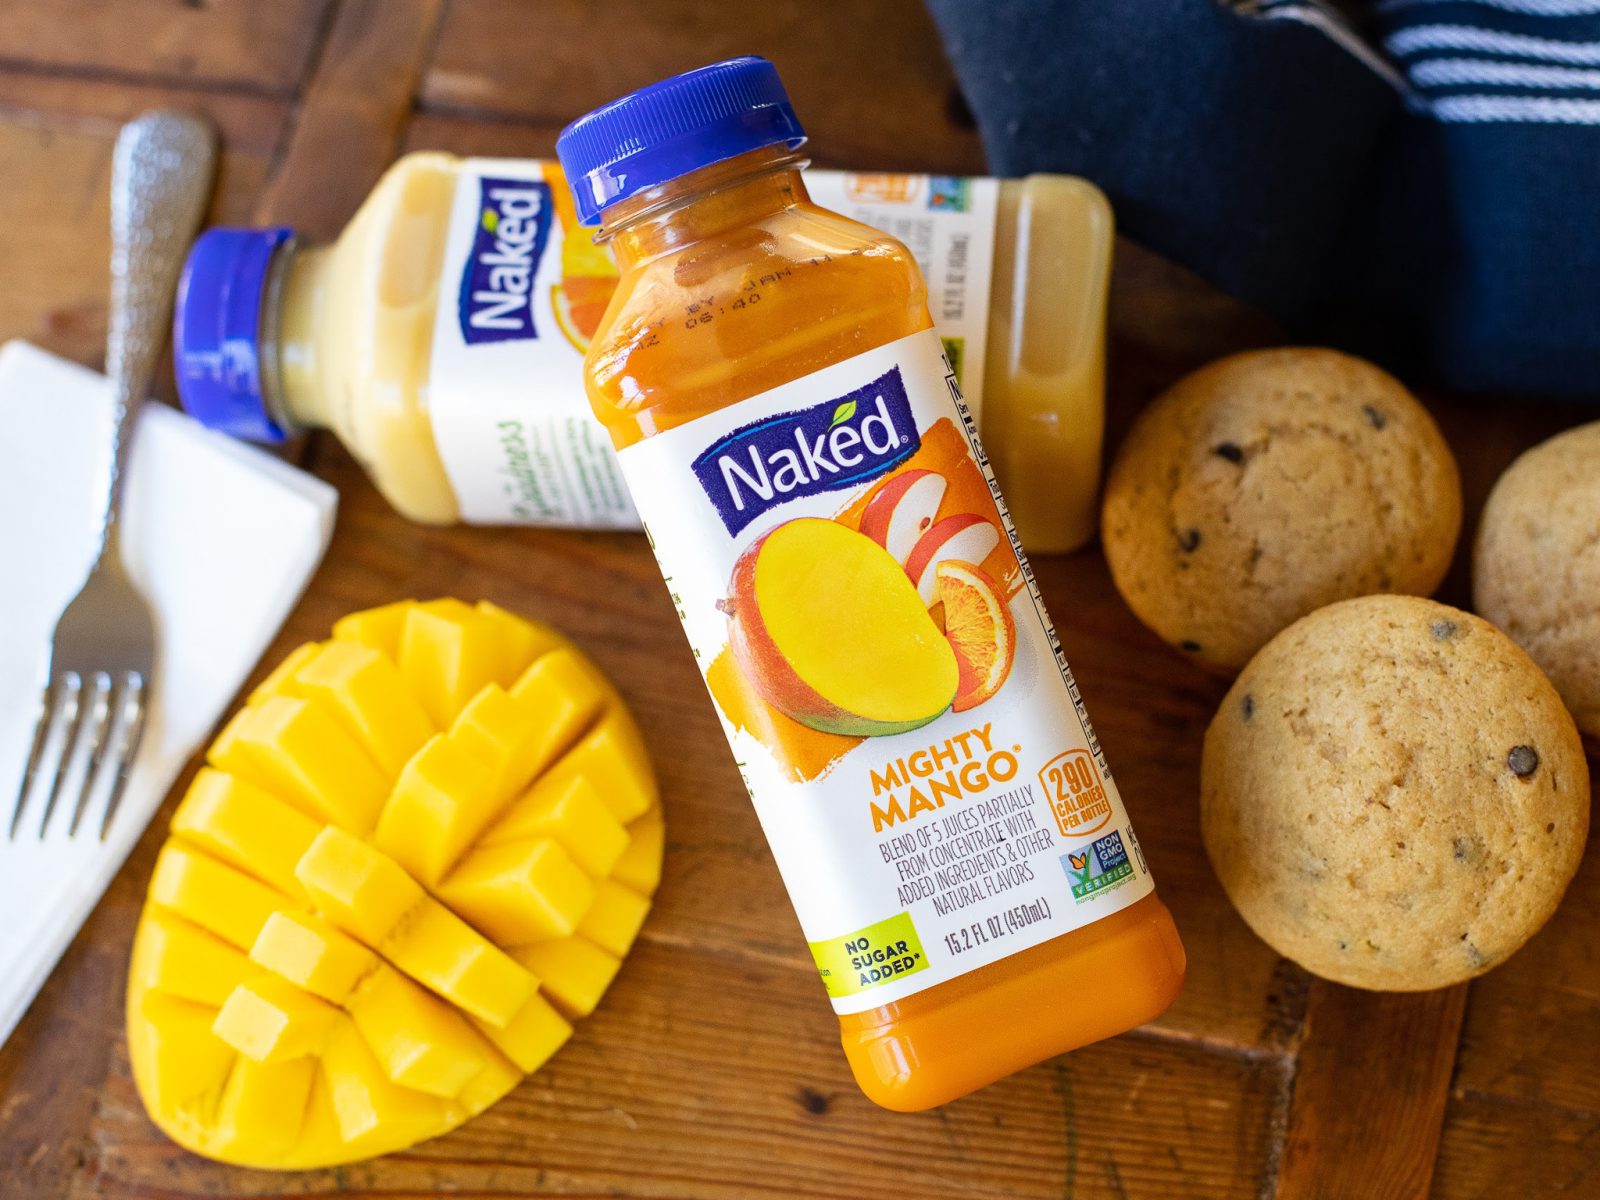 Naked Juice As Low As $2.16 Per Bottle At Publix